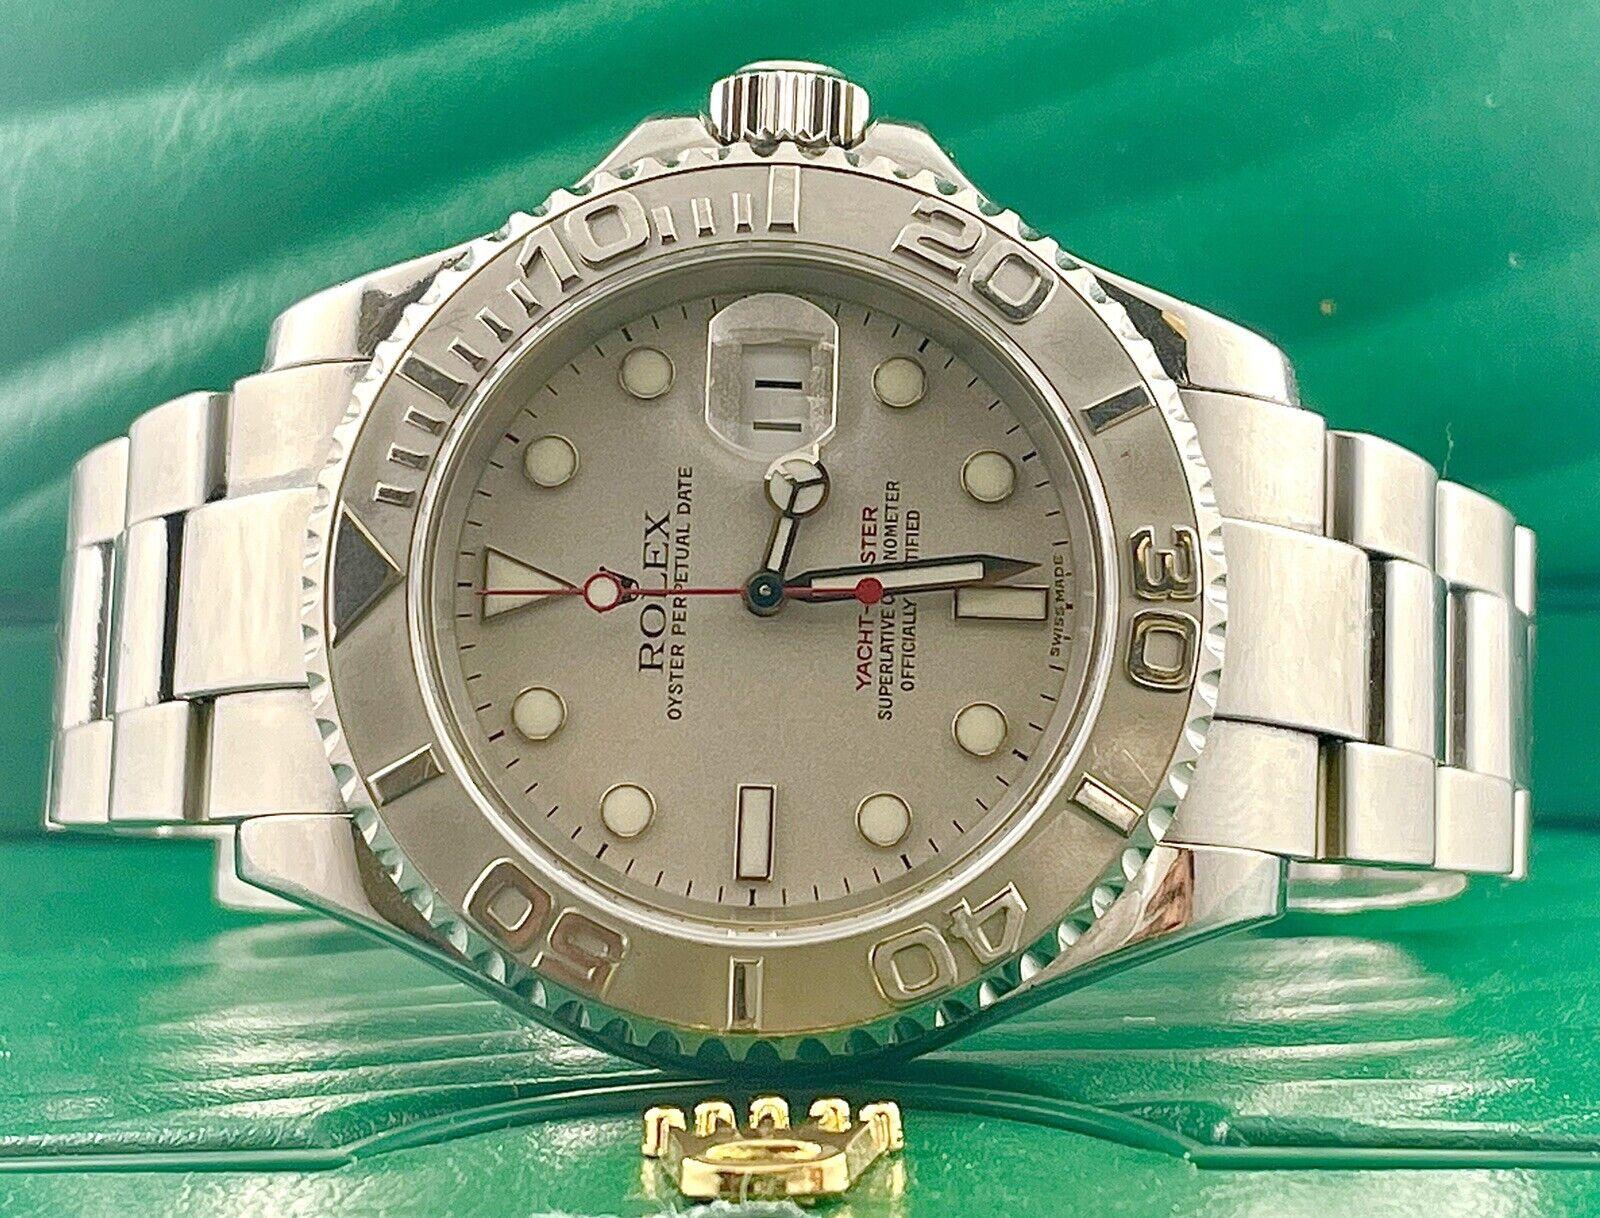 Rolex Yacht-Master 40mm Watch. A Pre-owned watch w/ Gift Box. Watch is 100% Authentic and Comes with Authenticity Card. Watch Reference is 16622 and is in Great Condition (See Pictures). The dial color is Platinum and material is Stainless Steel.